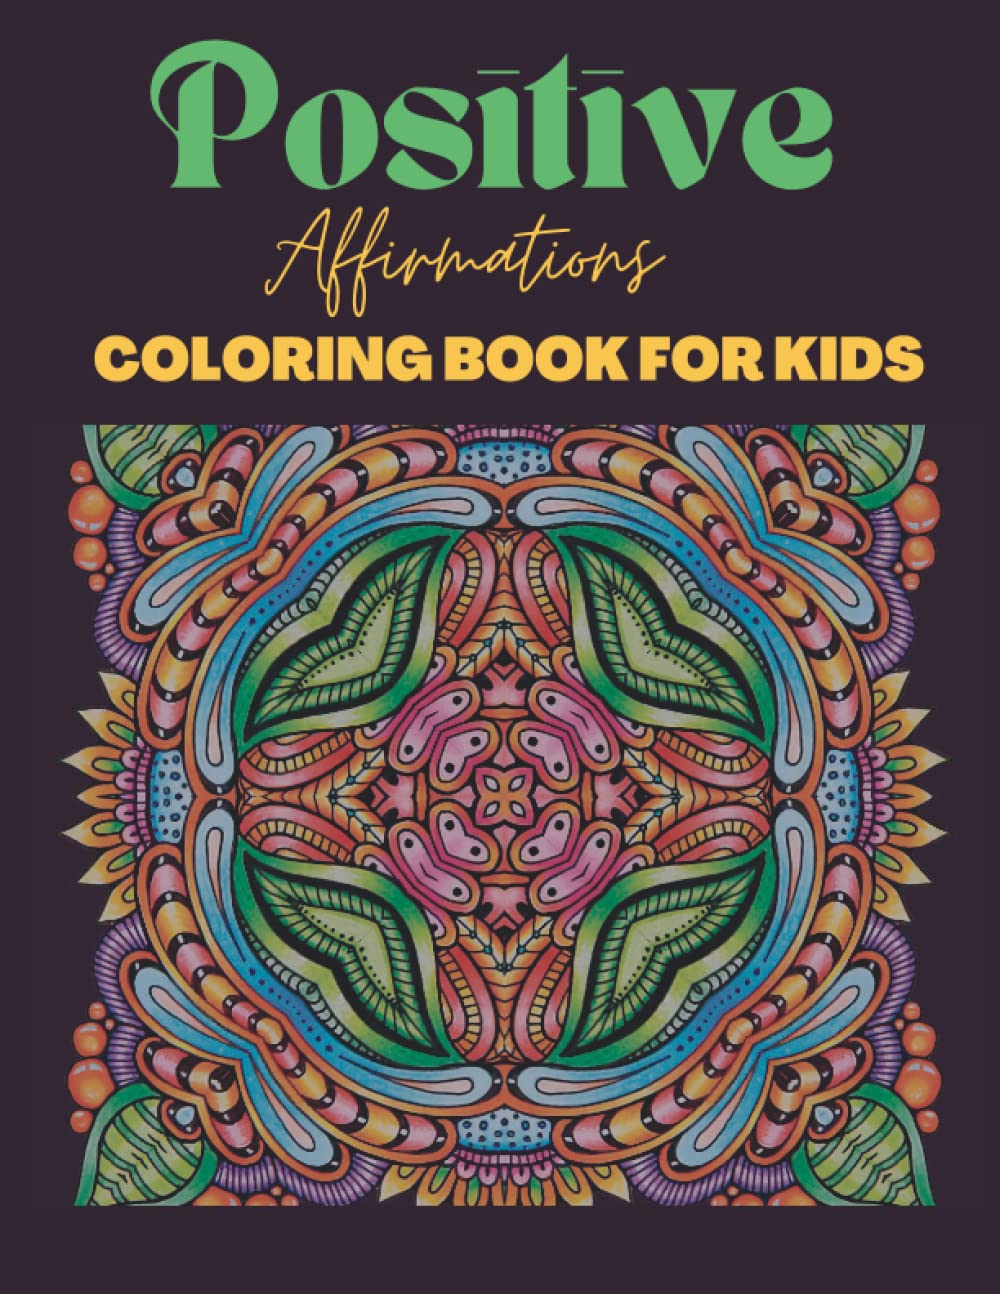 Affirmation Coloring Book For Kids & Teens: A Morale Building Coloring Book For Kids & Teens, 50 Positive Affirmations & Illustrations -8.5x11  Inches $6.2